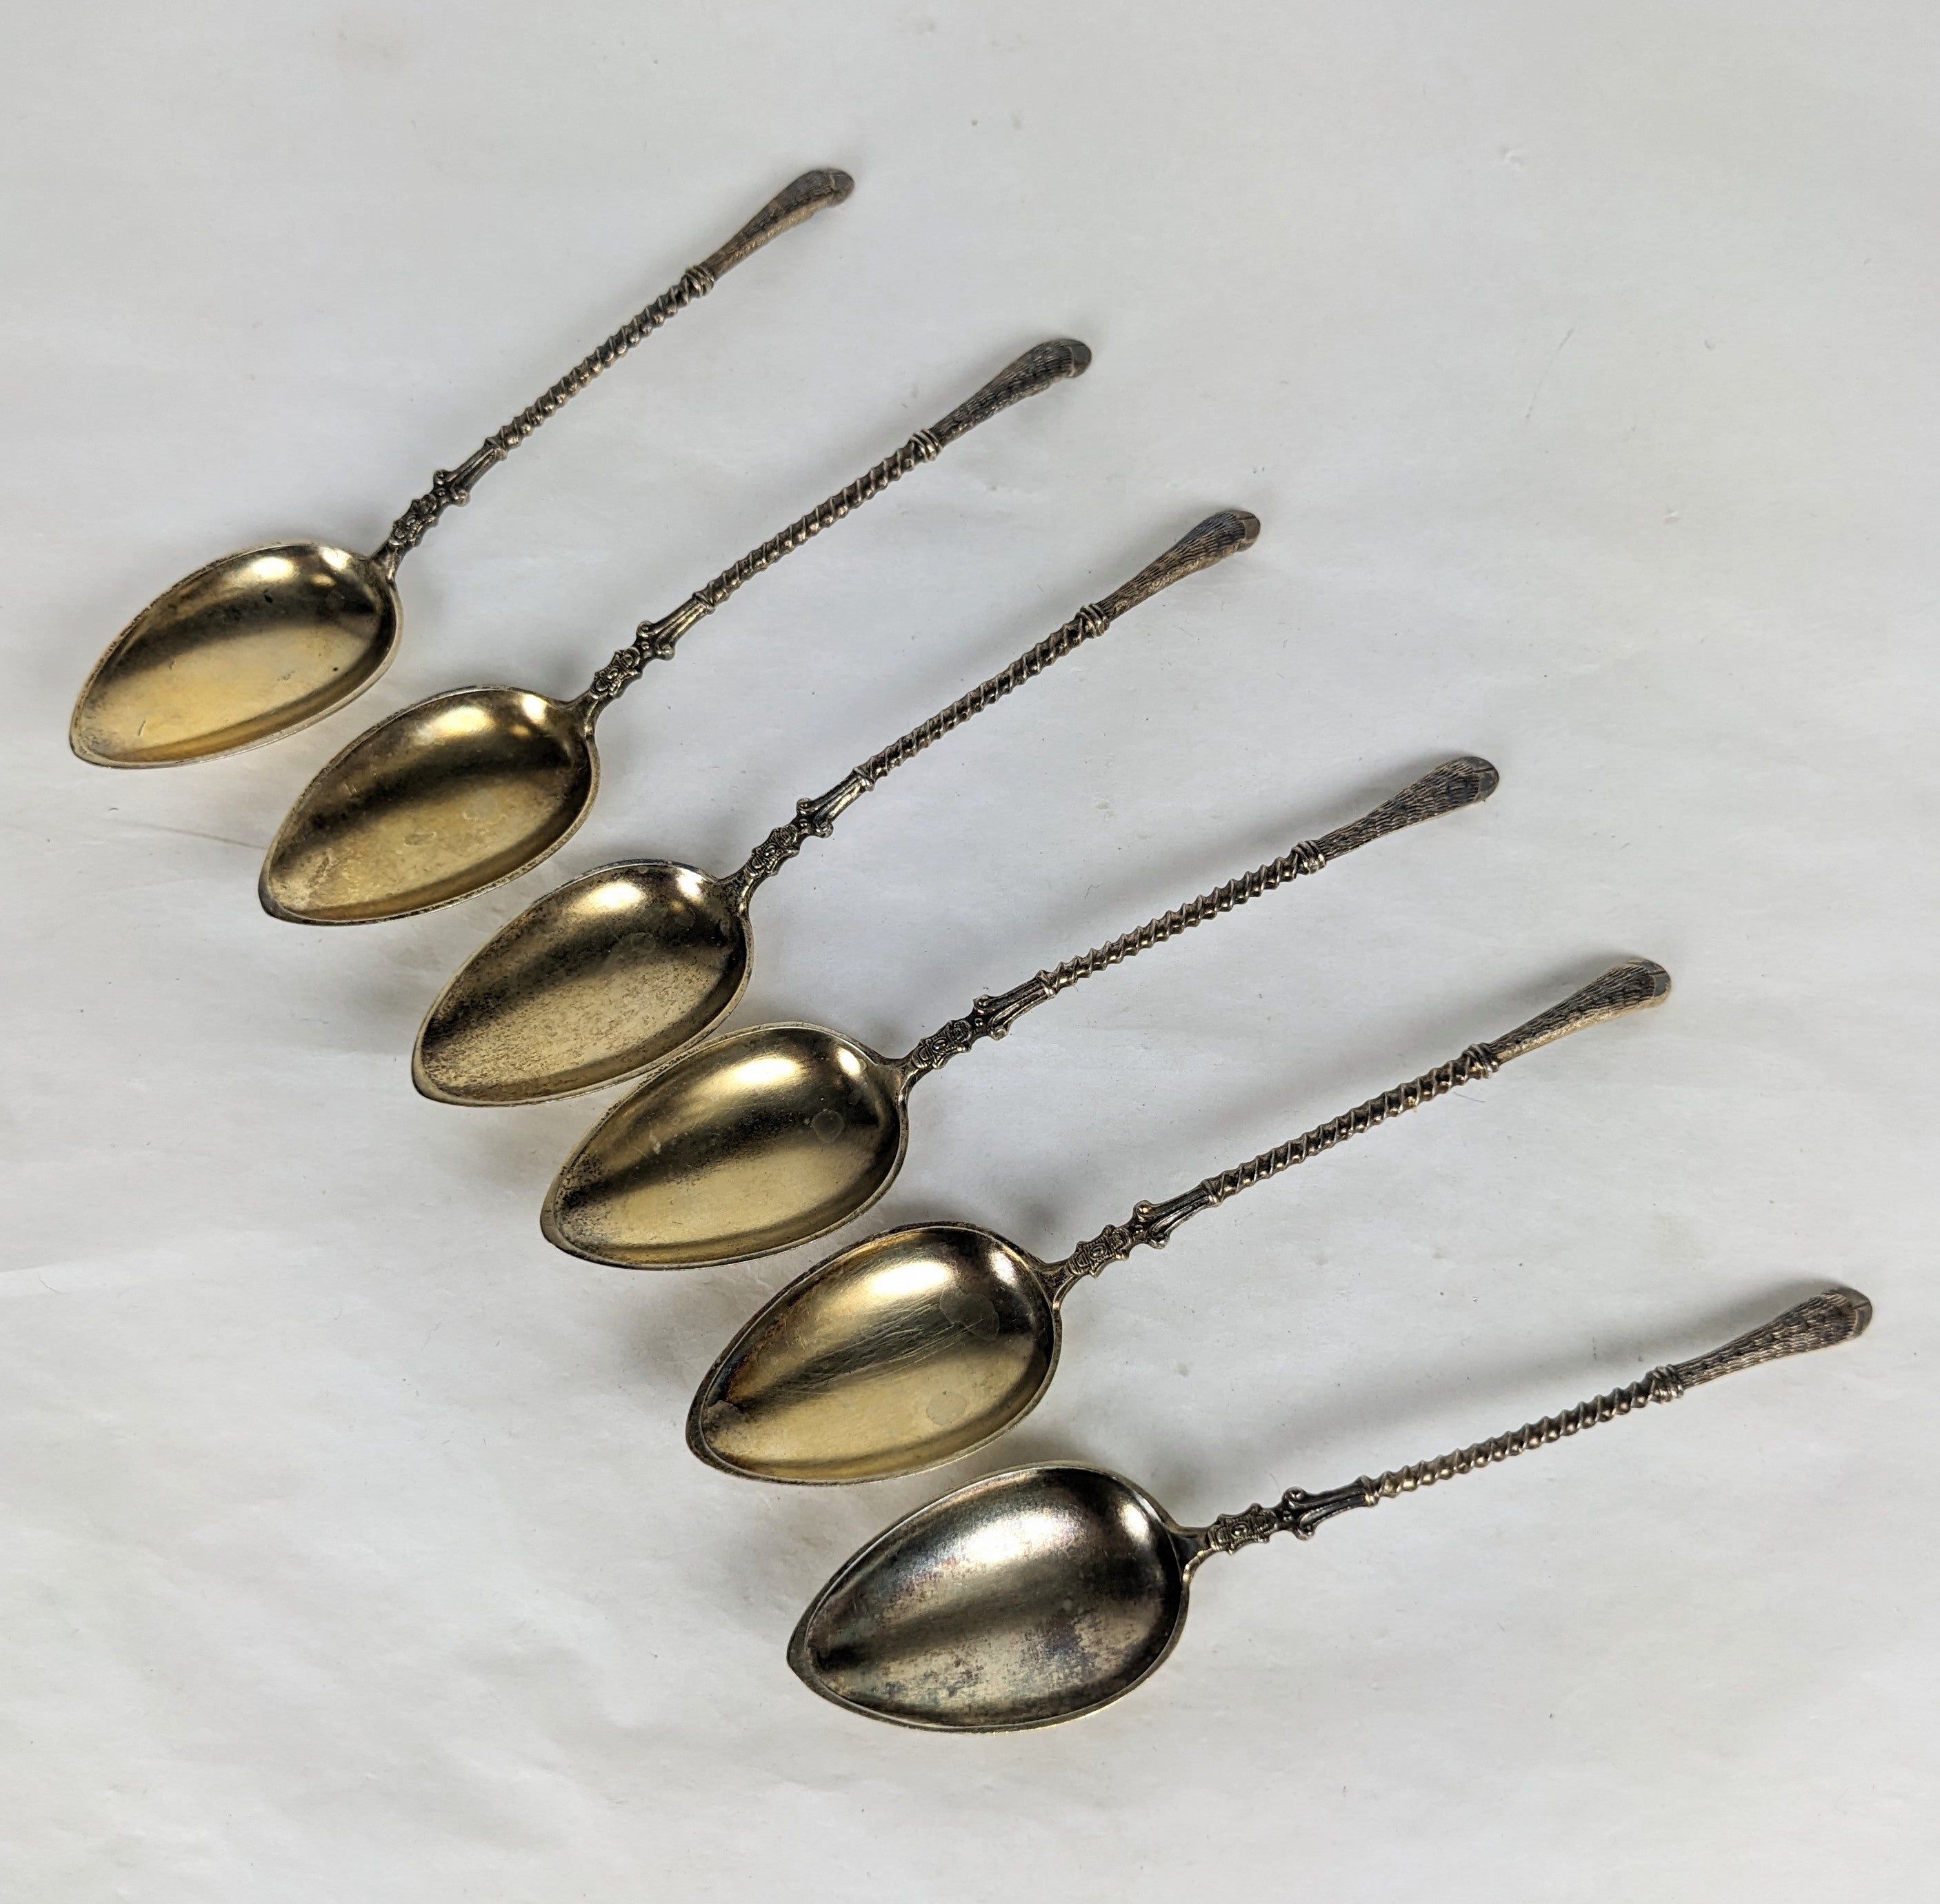 Set of 6 Unusual Figural Demitasse Spoons from the turn of the 20th Century with animal hoof handles. Beautifully detailed with twisted stem and vermeil bowls. 1900 Germany. 